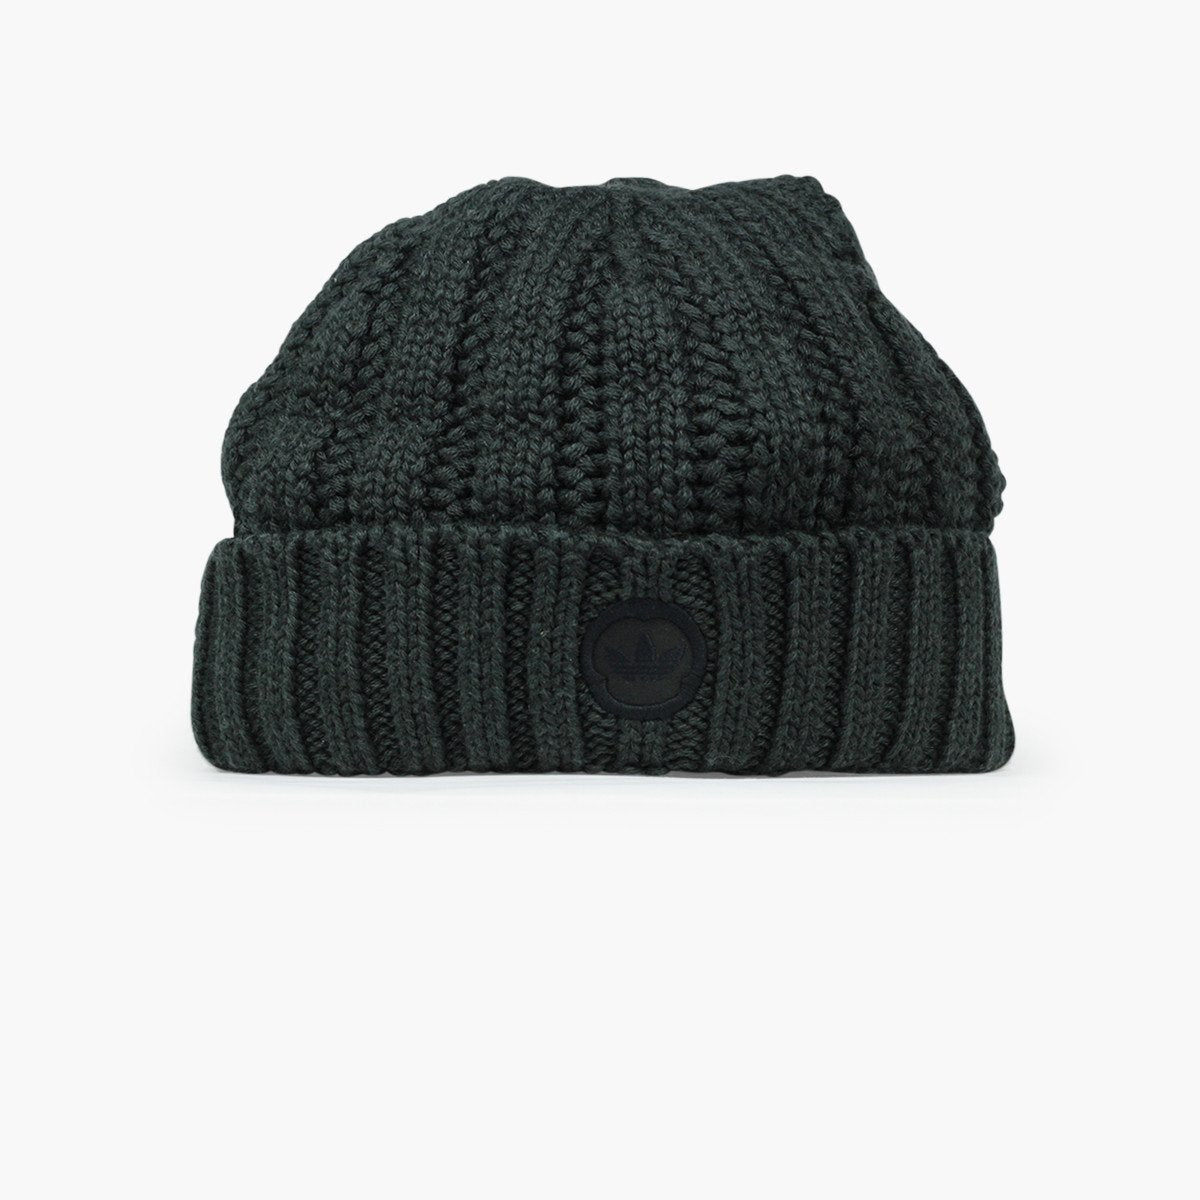 WH Beanie-BK7839-Charcoal-One Size-SUEDE Store